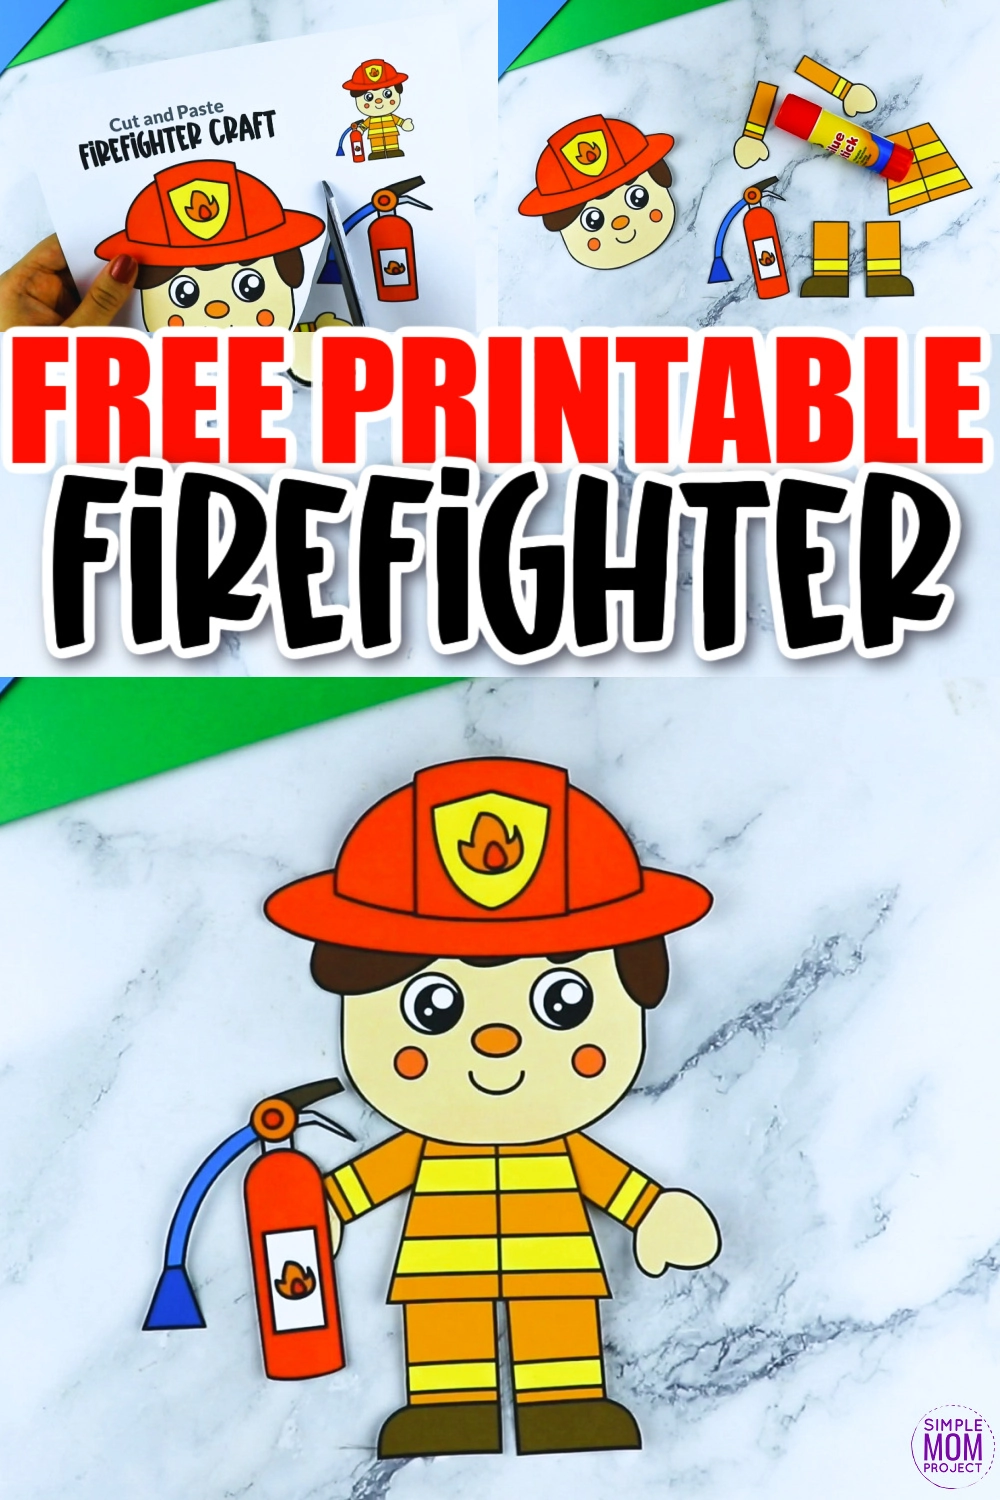 Free printable firefighter craft template â simple mom project